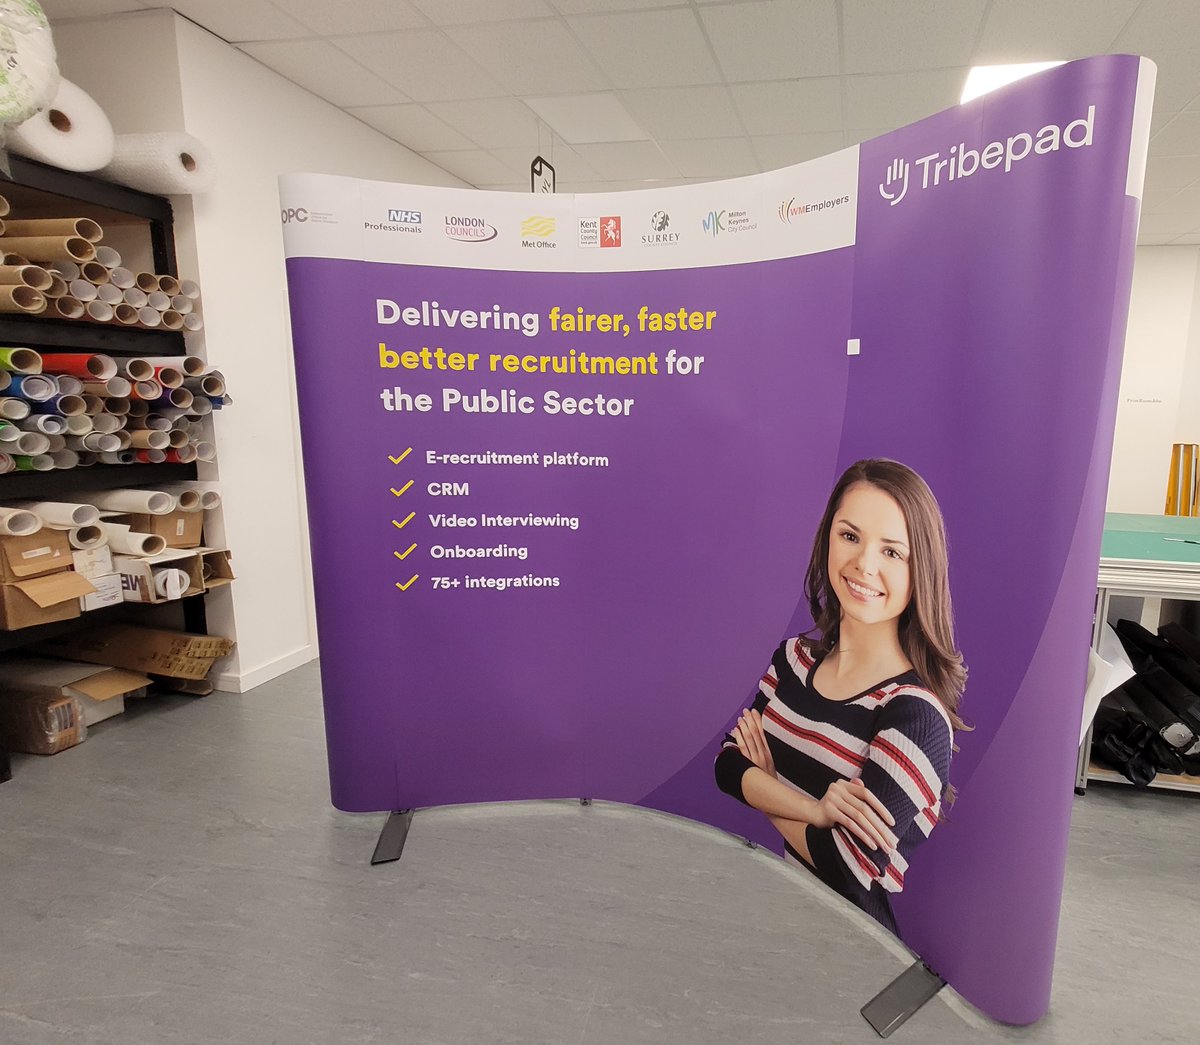 Happy Monday to all our followers! We recently printed a series of large exhibition stands for Tribepad. Now that's some super-sized signage! 🤩 Go to fwdmotion.co.uk to discover our full range of services. #marketingstrategy #printsolutions #graphicdesign